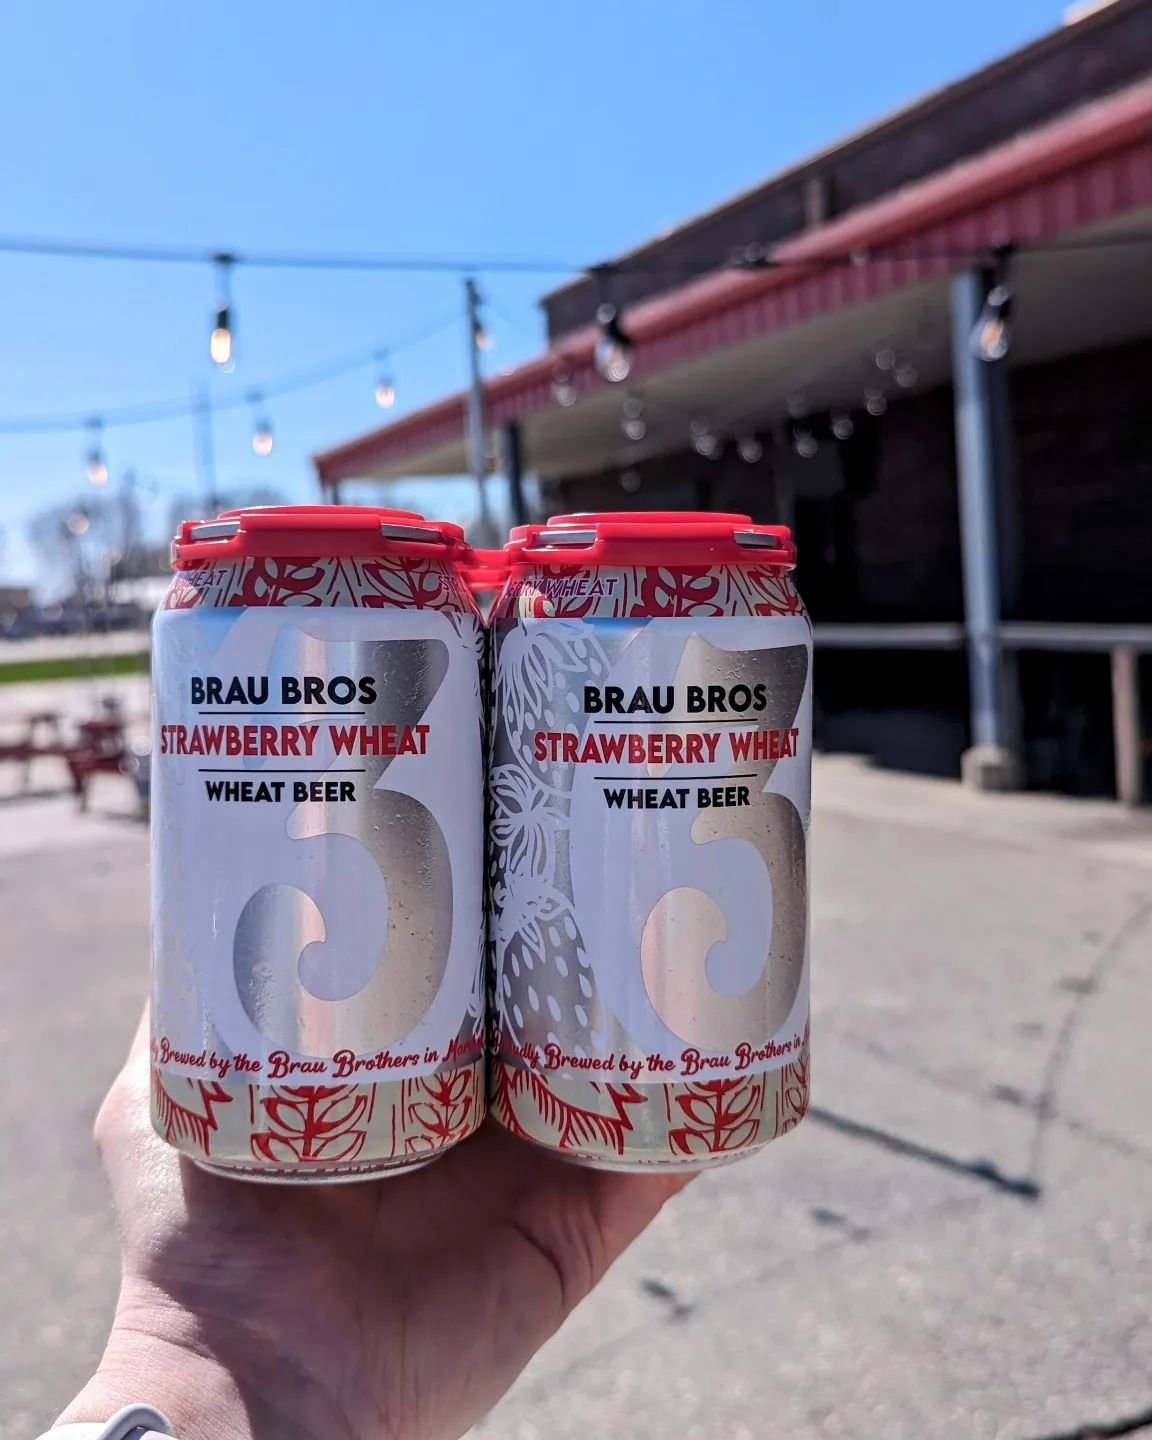 Today's a 'grab some beer for your patio' kind of day. ☀️

#craftbeer #brewery #braubeer #patio